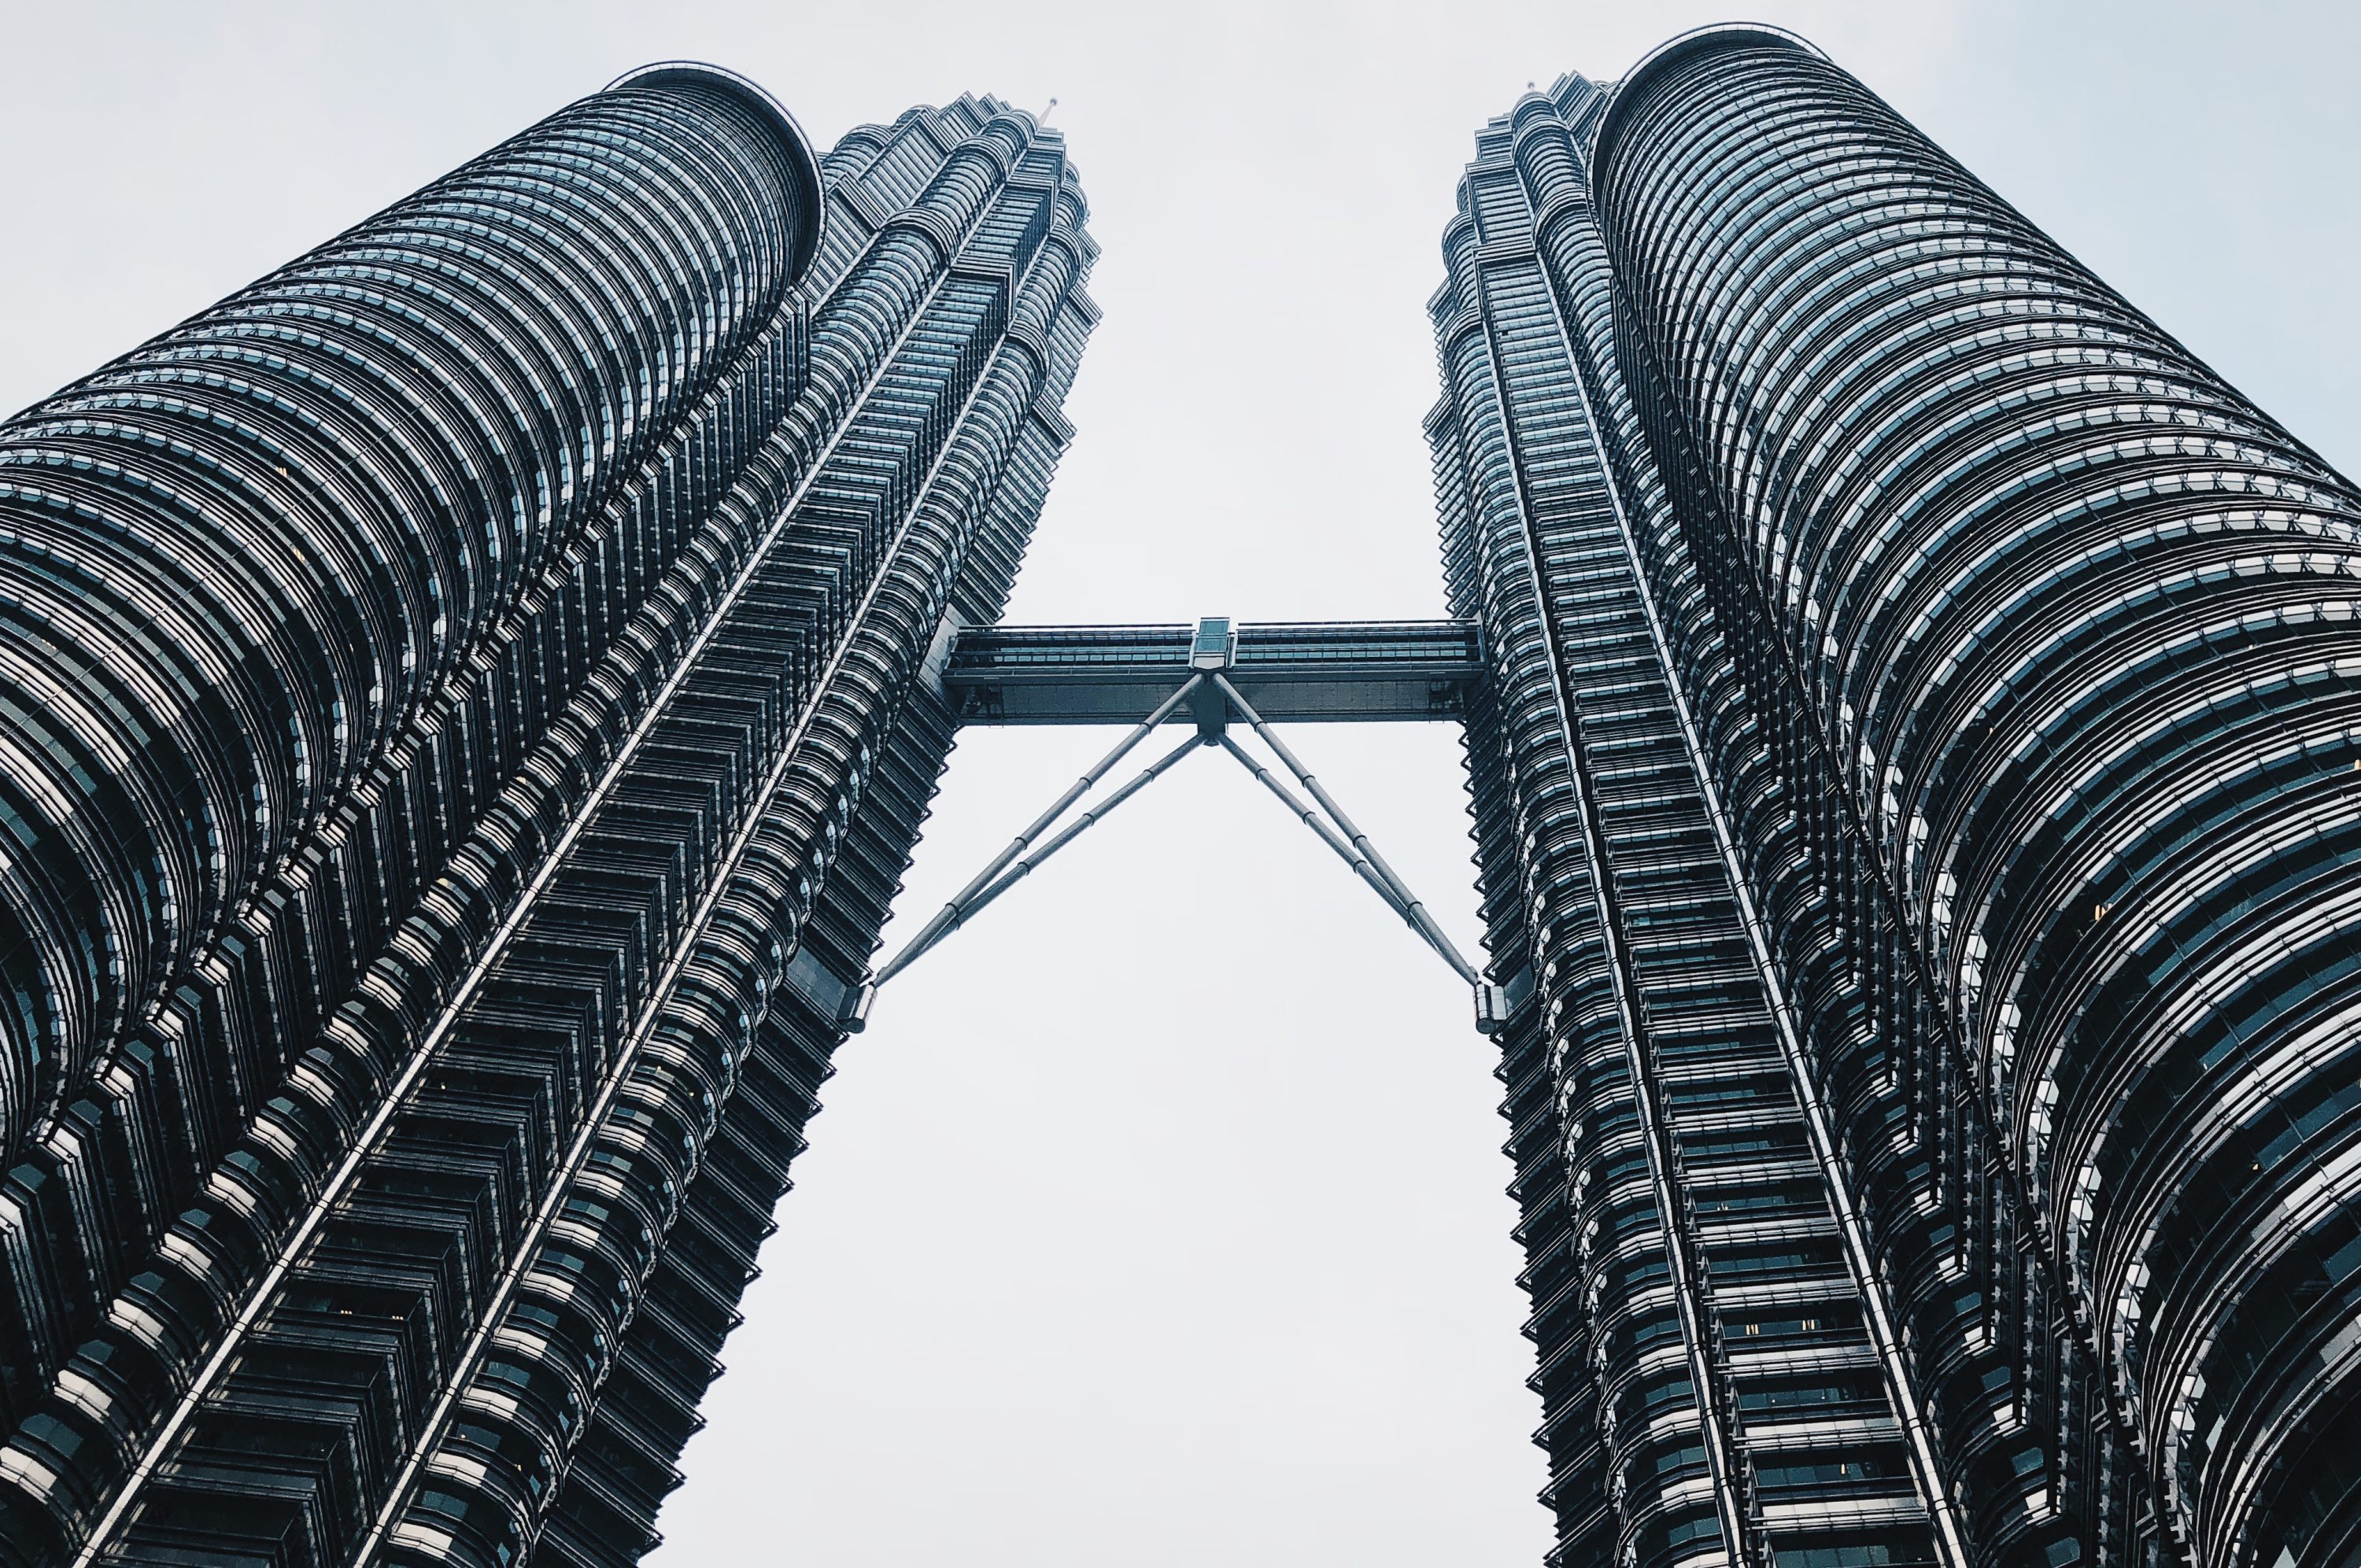 An off-the-beaten-track guide for the Kuala Lumpur newbie